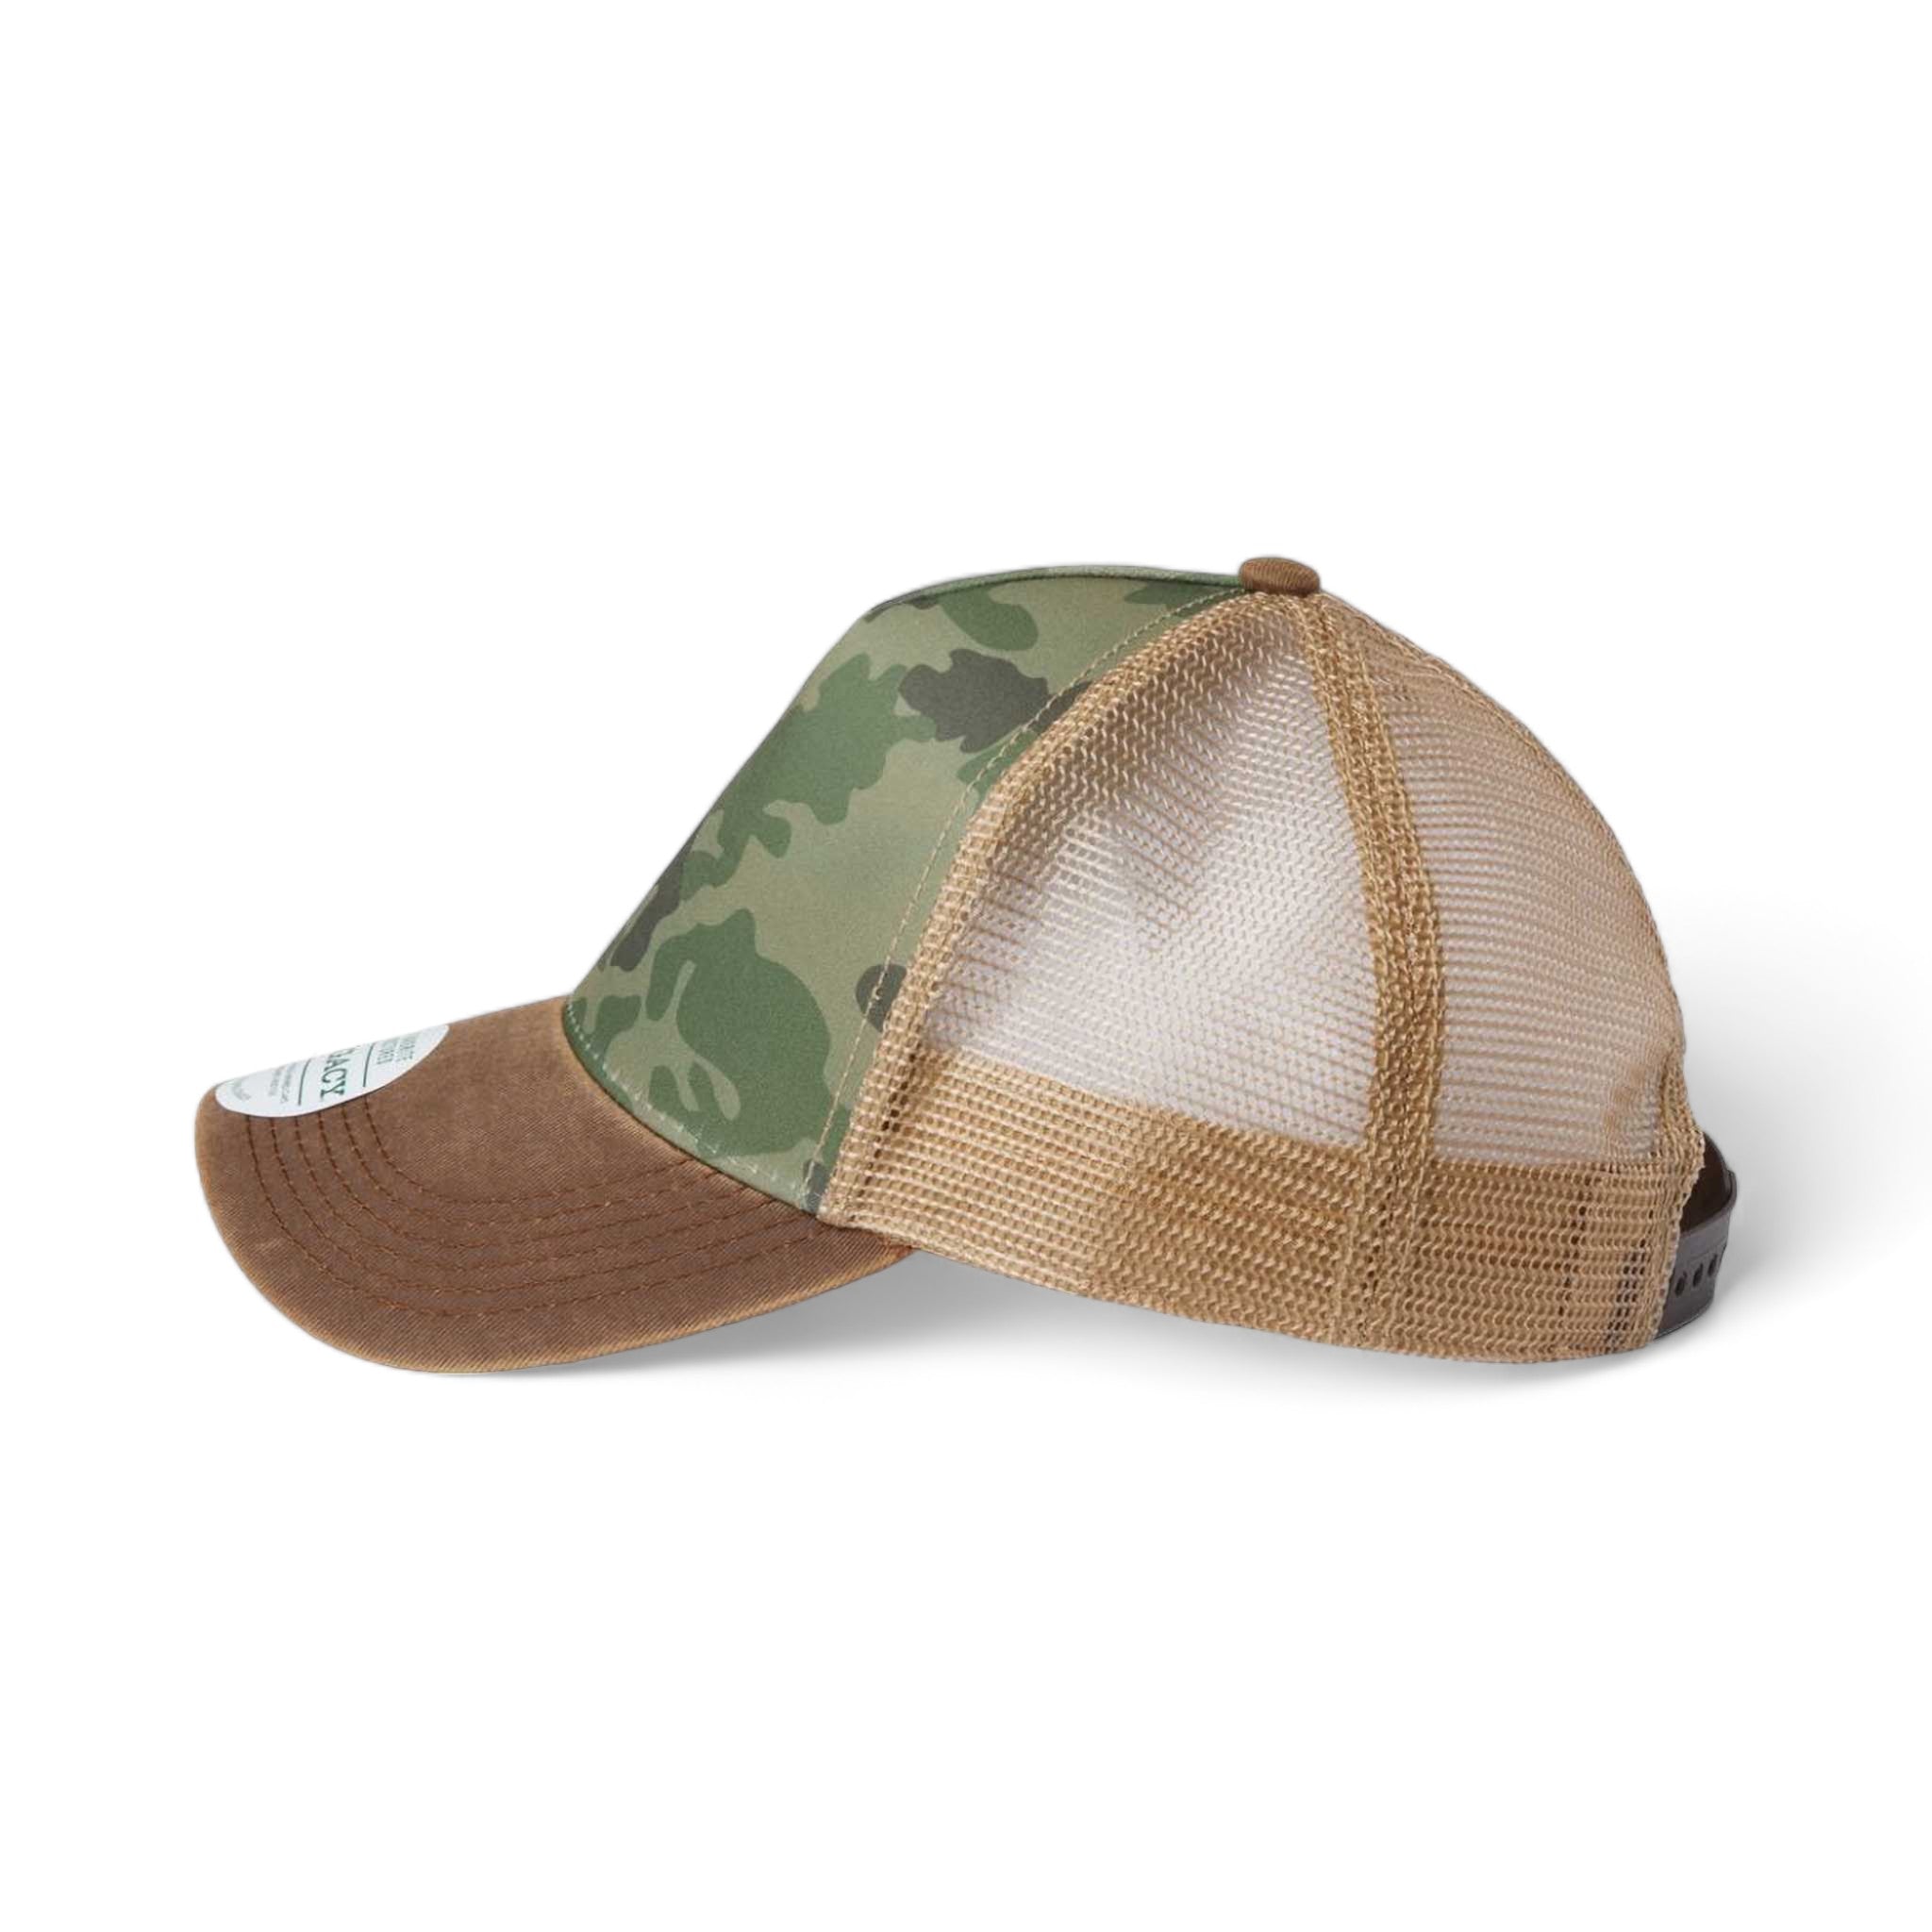 Side view of LEGACY OFAFP custom hat in army camo, brown and khaki